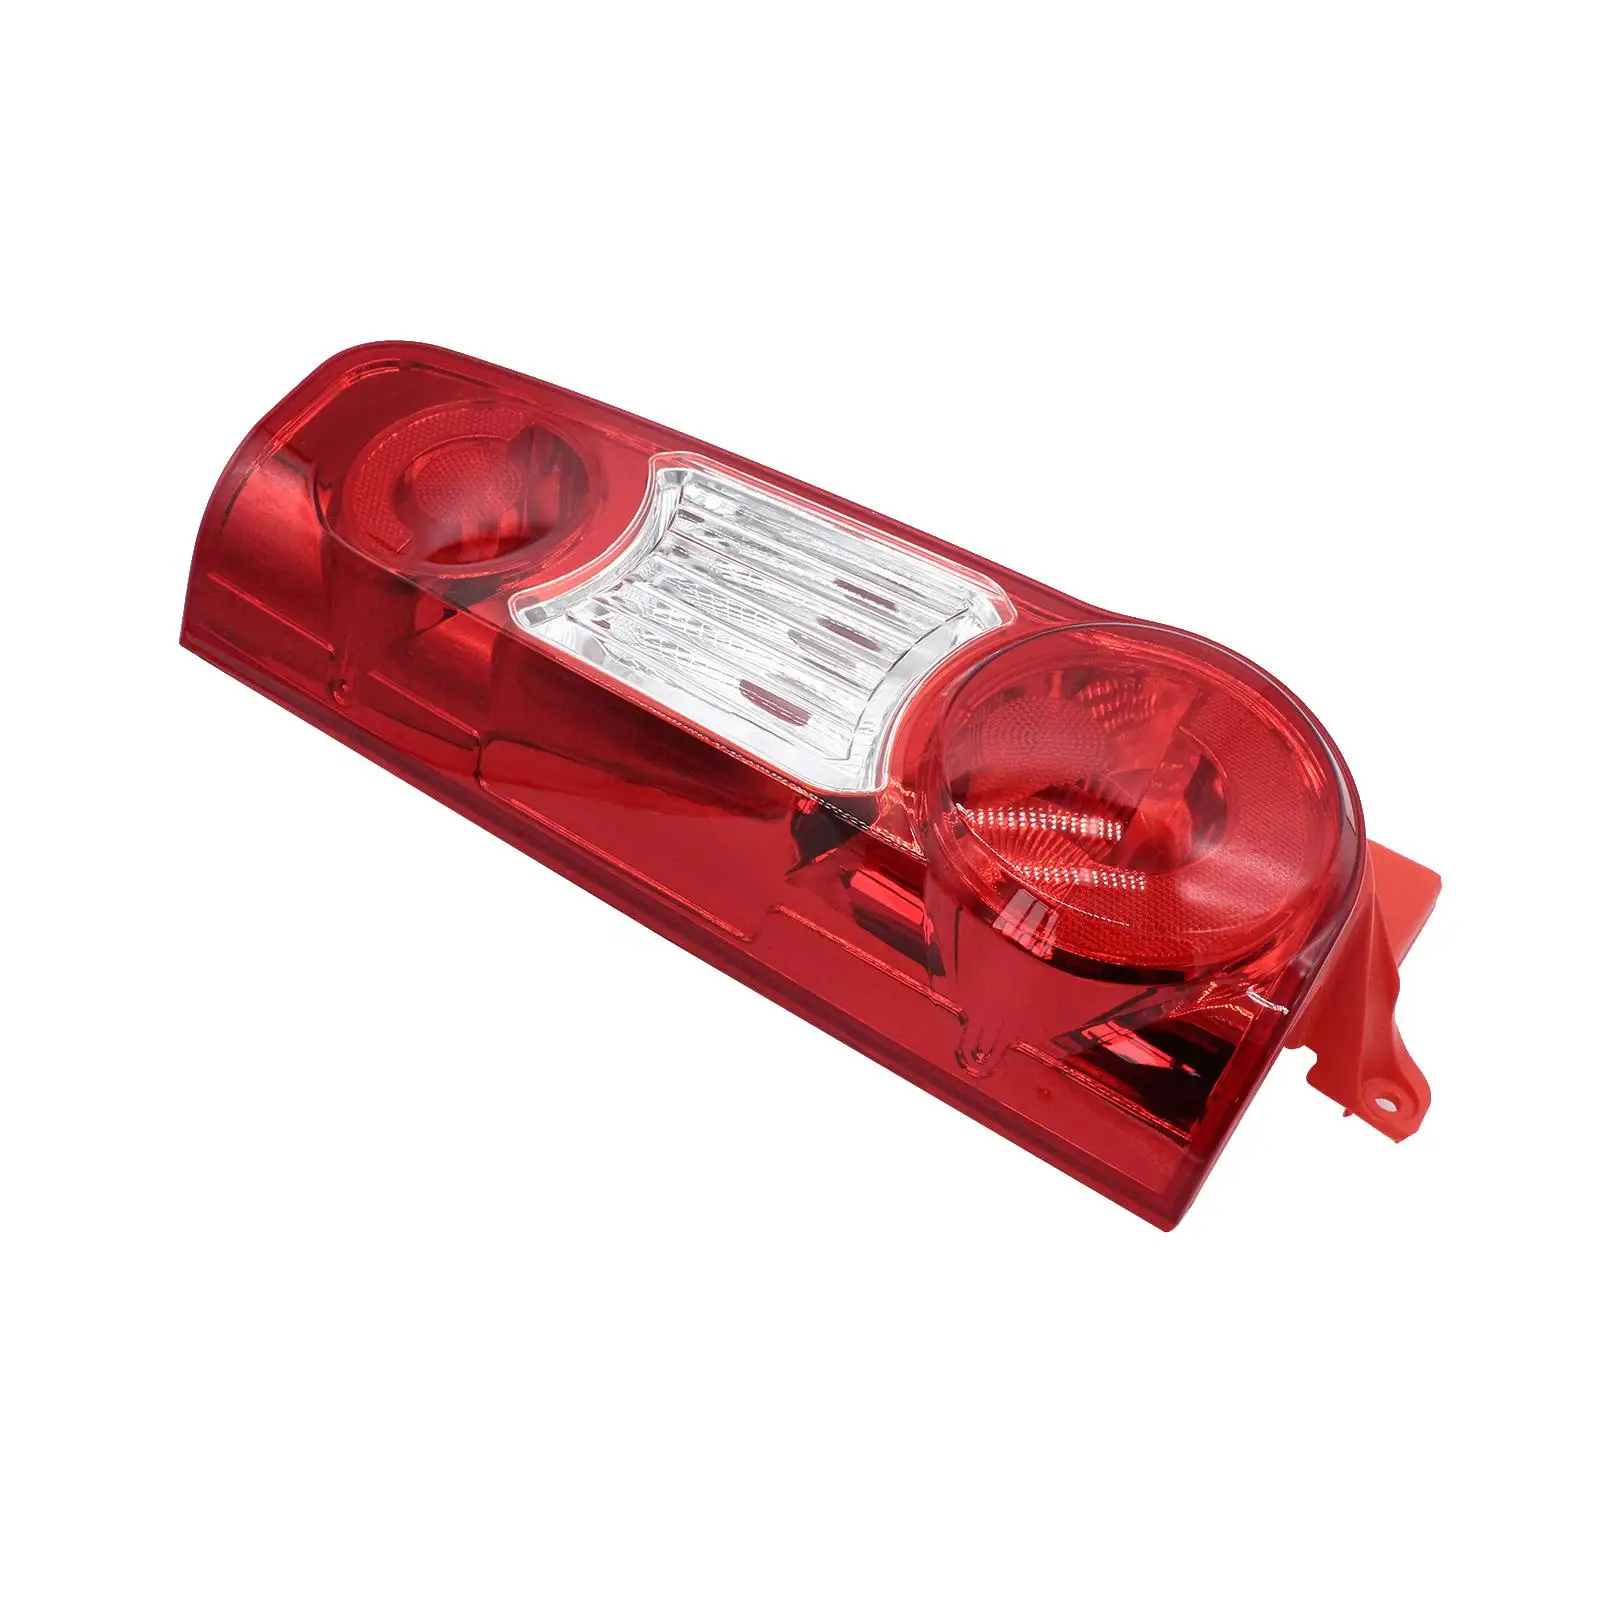 Rear Tail Light Lamp Assembly 6350FJ Repair Parts Tail Lights for Peugeot Partner 2008-2012 Left Side Durable Accessories